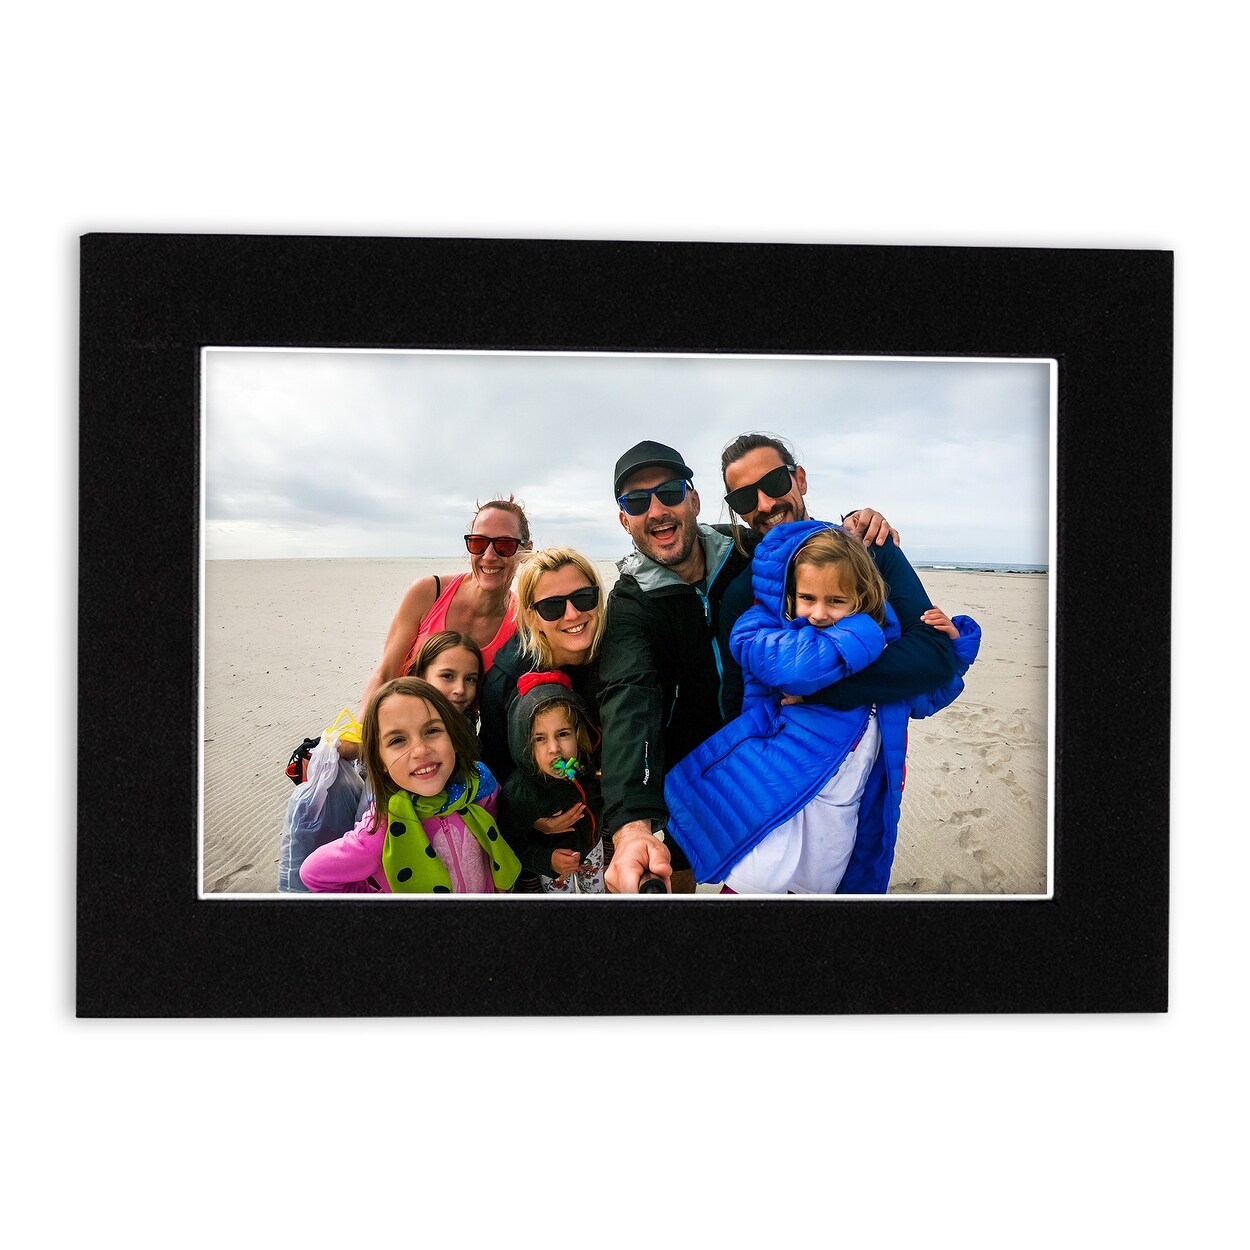  16x20 Mat for 12x16 Photo - Precut White on White Double Mat  Picture Matboard for Frames Measuring 16 x 20 Inches - Bevel Cut Matte to  Display Art Measuring 12 x